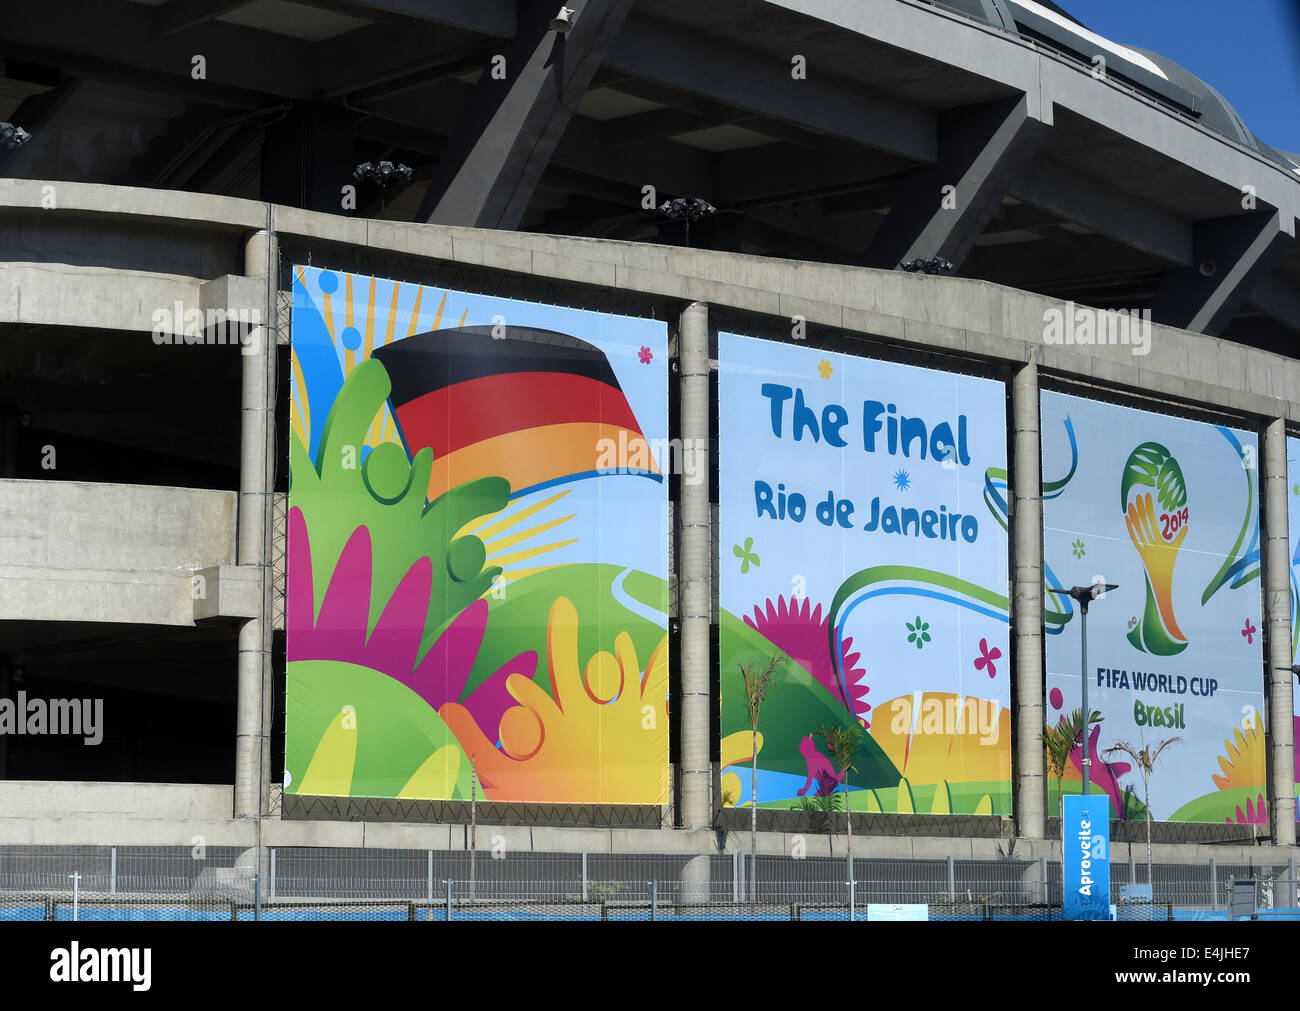 Rio de Janeiro, Brazil. 13th July, 2014. A sign with the German flag and World Cup logo hangs outside the Maracana Stadium before the FIFA World Cup 2014 soccer final between Germany and Argentina at the Estadio do Maracana in Rio de Janeiro, Brazil, 13 July 2014. Photo: Andreas Gebert/dpa/Alamy Live News Stock Photo